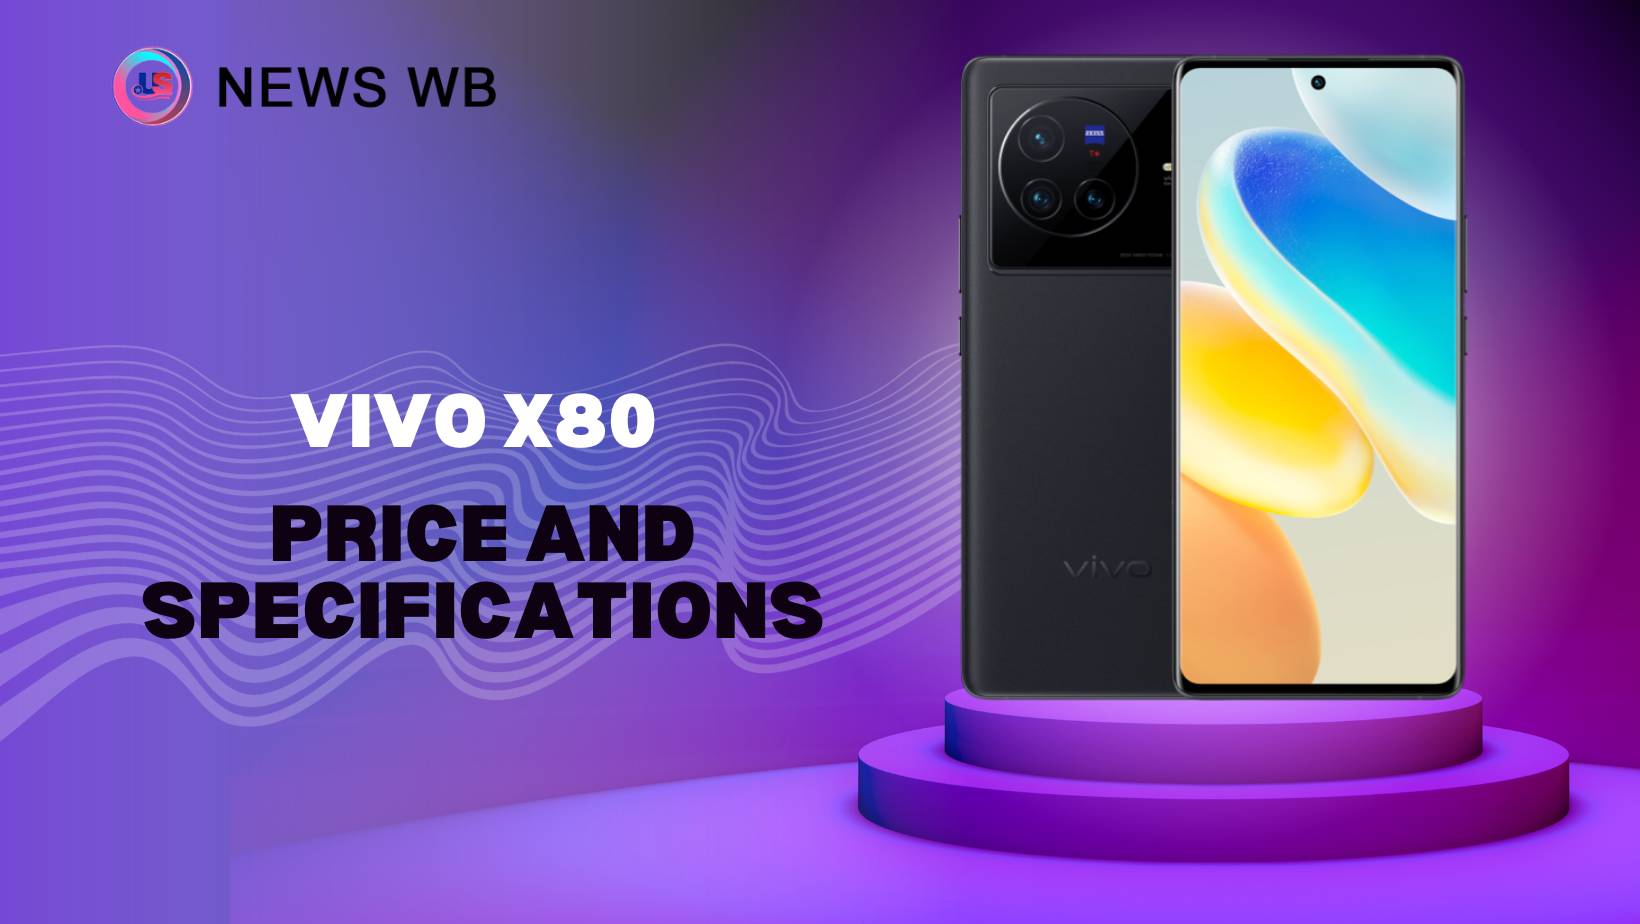 Vivo X80 Price and Specifications